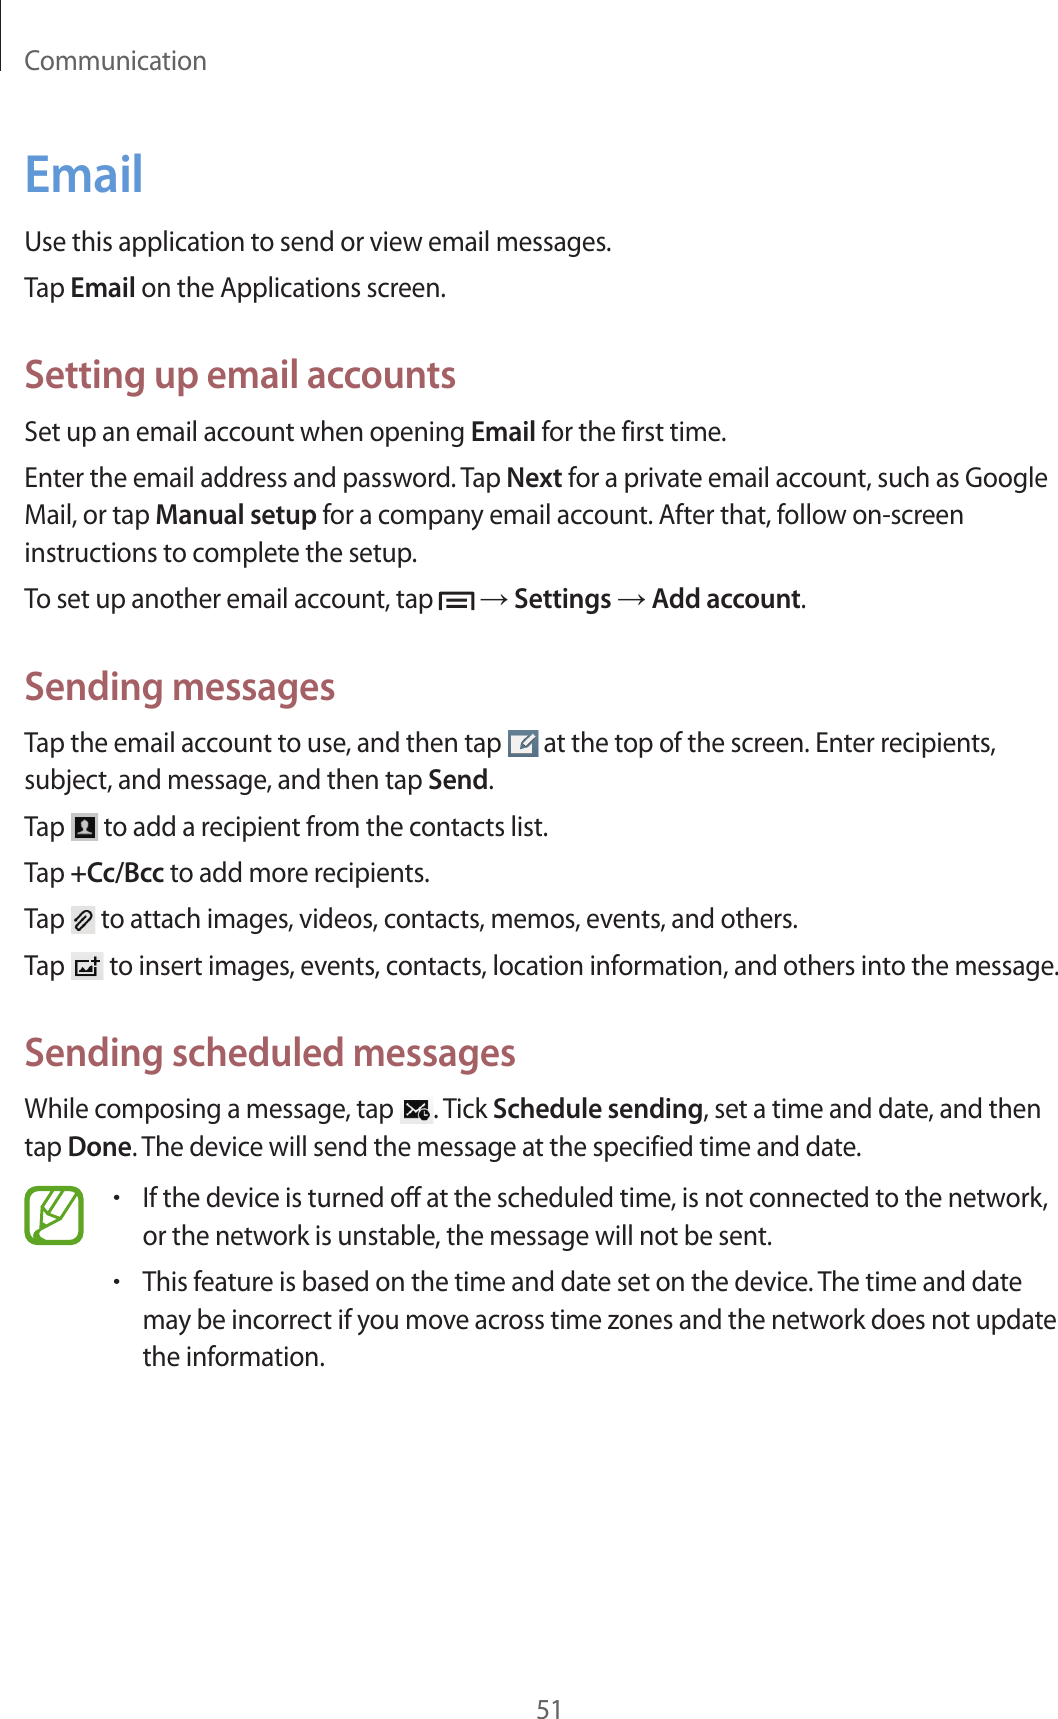 Communication51EmailUse this application to send or view email messages.Tap Email on the Applications screen.Setting up email accountsSet up an email account when opening Email for the first time.Enter the email address and password. Tap Next for a private email account, such as Google Mail, or tap Manual setup for a company email account. After that, follow on-screen instructions to complete the setup.To set up another email account, tap   → Settings → Add account.Sending messagesTap the email account to use, and then tap   at the top of the screen. Enter recipients, subject, and message, and then tap Send.Tap   to add a recipient from the contacts list.Tap +Cc/Bcc to add more recipients.Tap   to attach images, videos, contacts, memos, events, and others.Tap   to insert images, events, contacts, location information, and others into the message.Sending scheduled messagesWhile composing a message, tap  . Tick Schedule sending, set a time and date, and then tap Done. The device will send the message at the specified time and date.•If the device is turned off at the scheduled time, is not connected to the network, or the network is unstable, the message will not be sent.•This feature is based on the time and date set on the device. The time and date may be incorrect if you move across time zones and the network does not update the information.